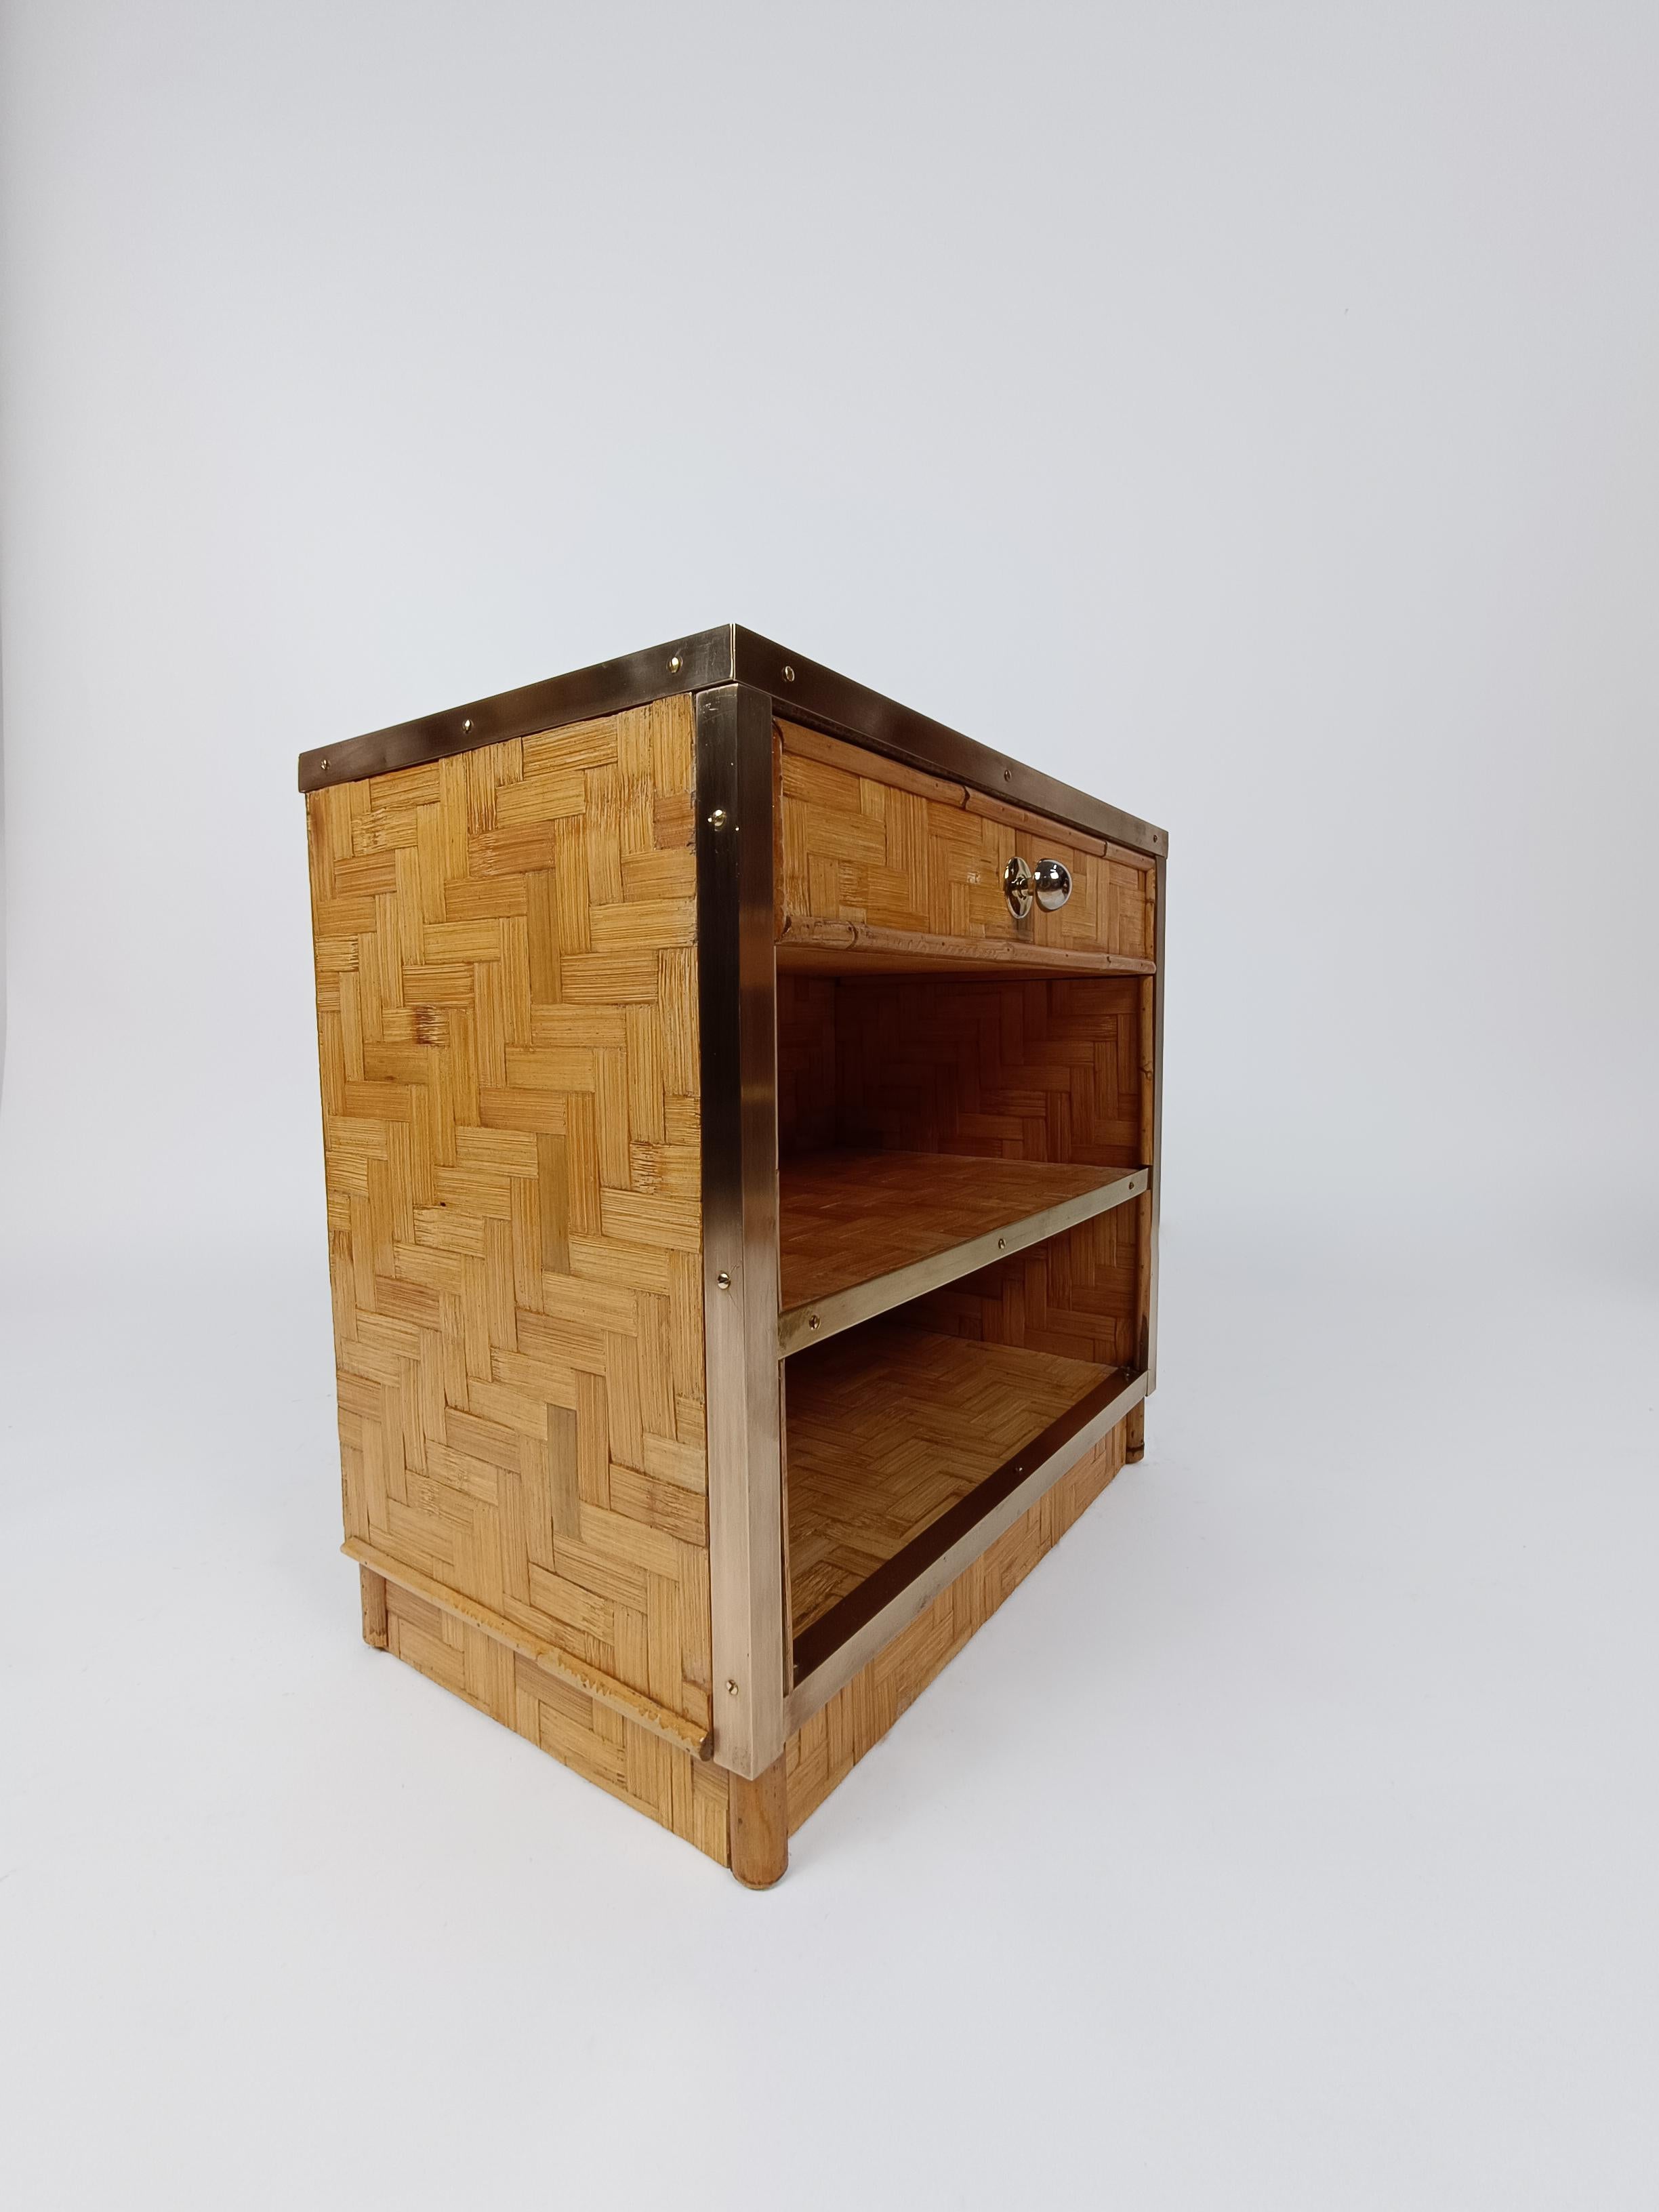 Midcentury Italian Bedside Tables in Bamboo Cane, Rattan and Brass, 1970s For Sale 10